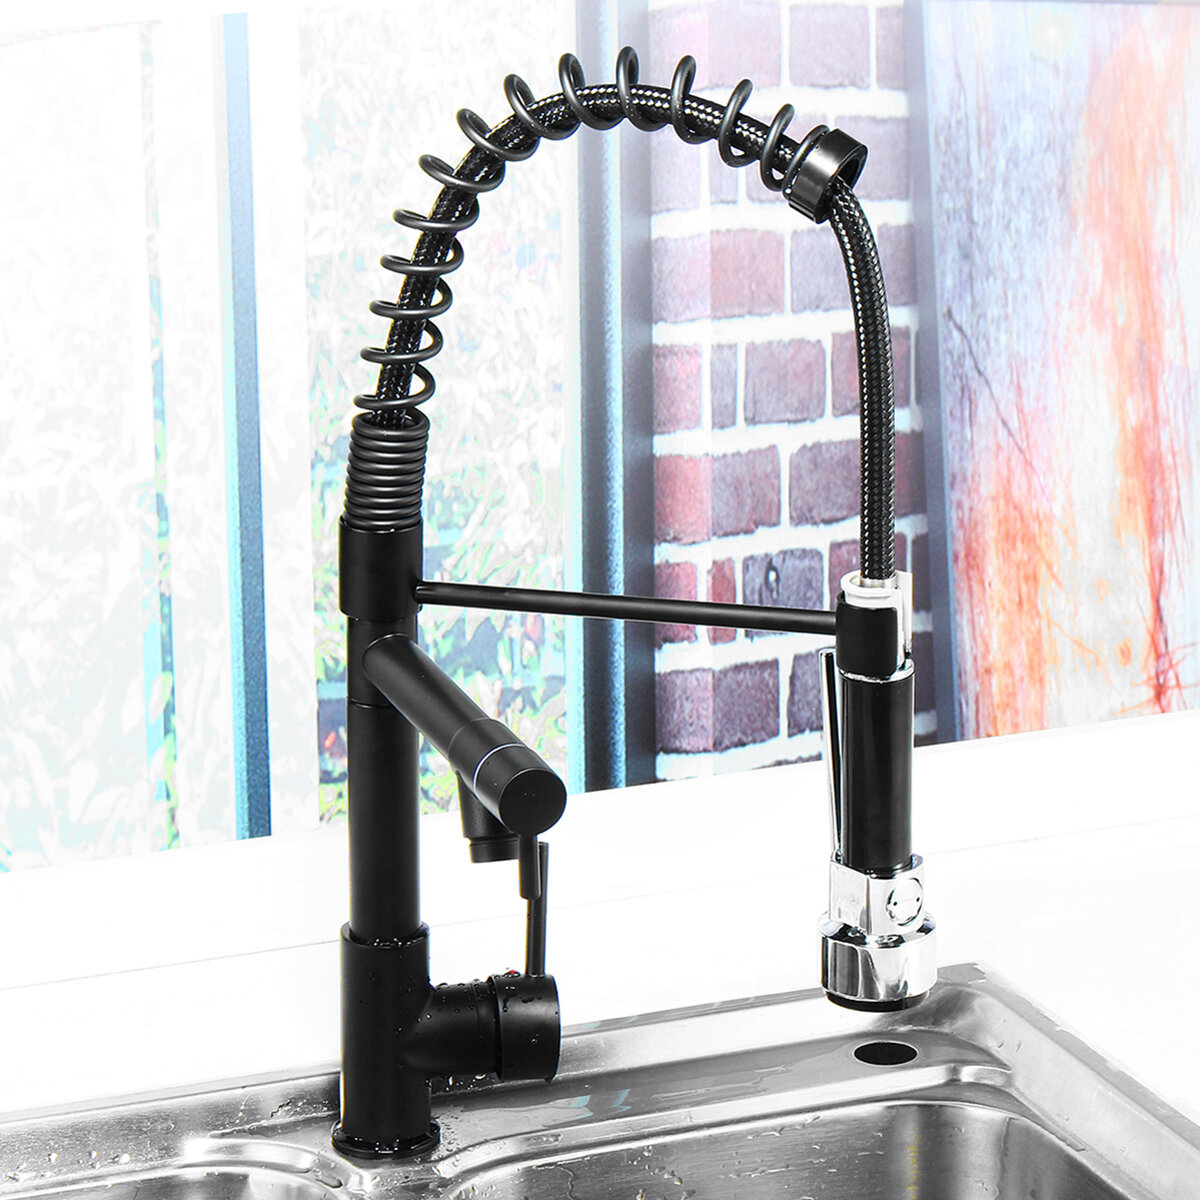 Oil Rubbed Bronze Kitchen Sink Faucet Single Handle Pull Down Sprayer Mixer Tap Us 79 45